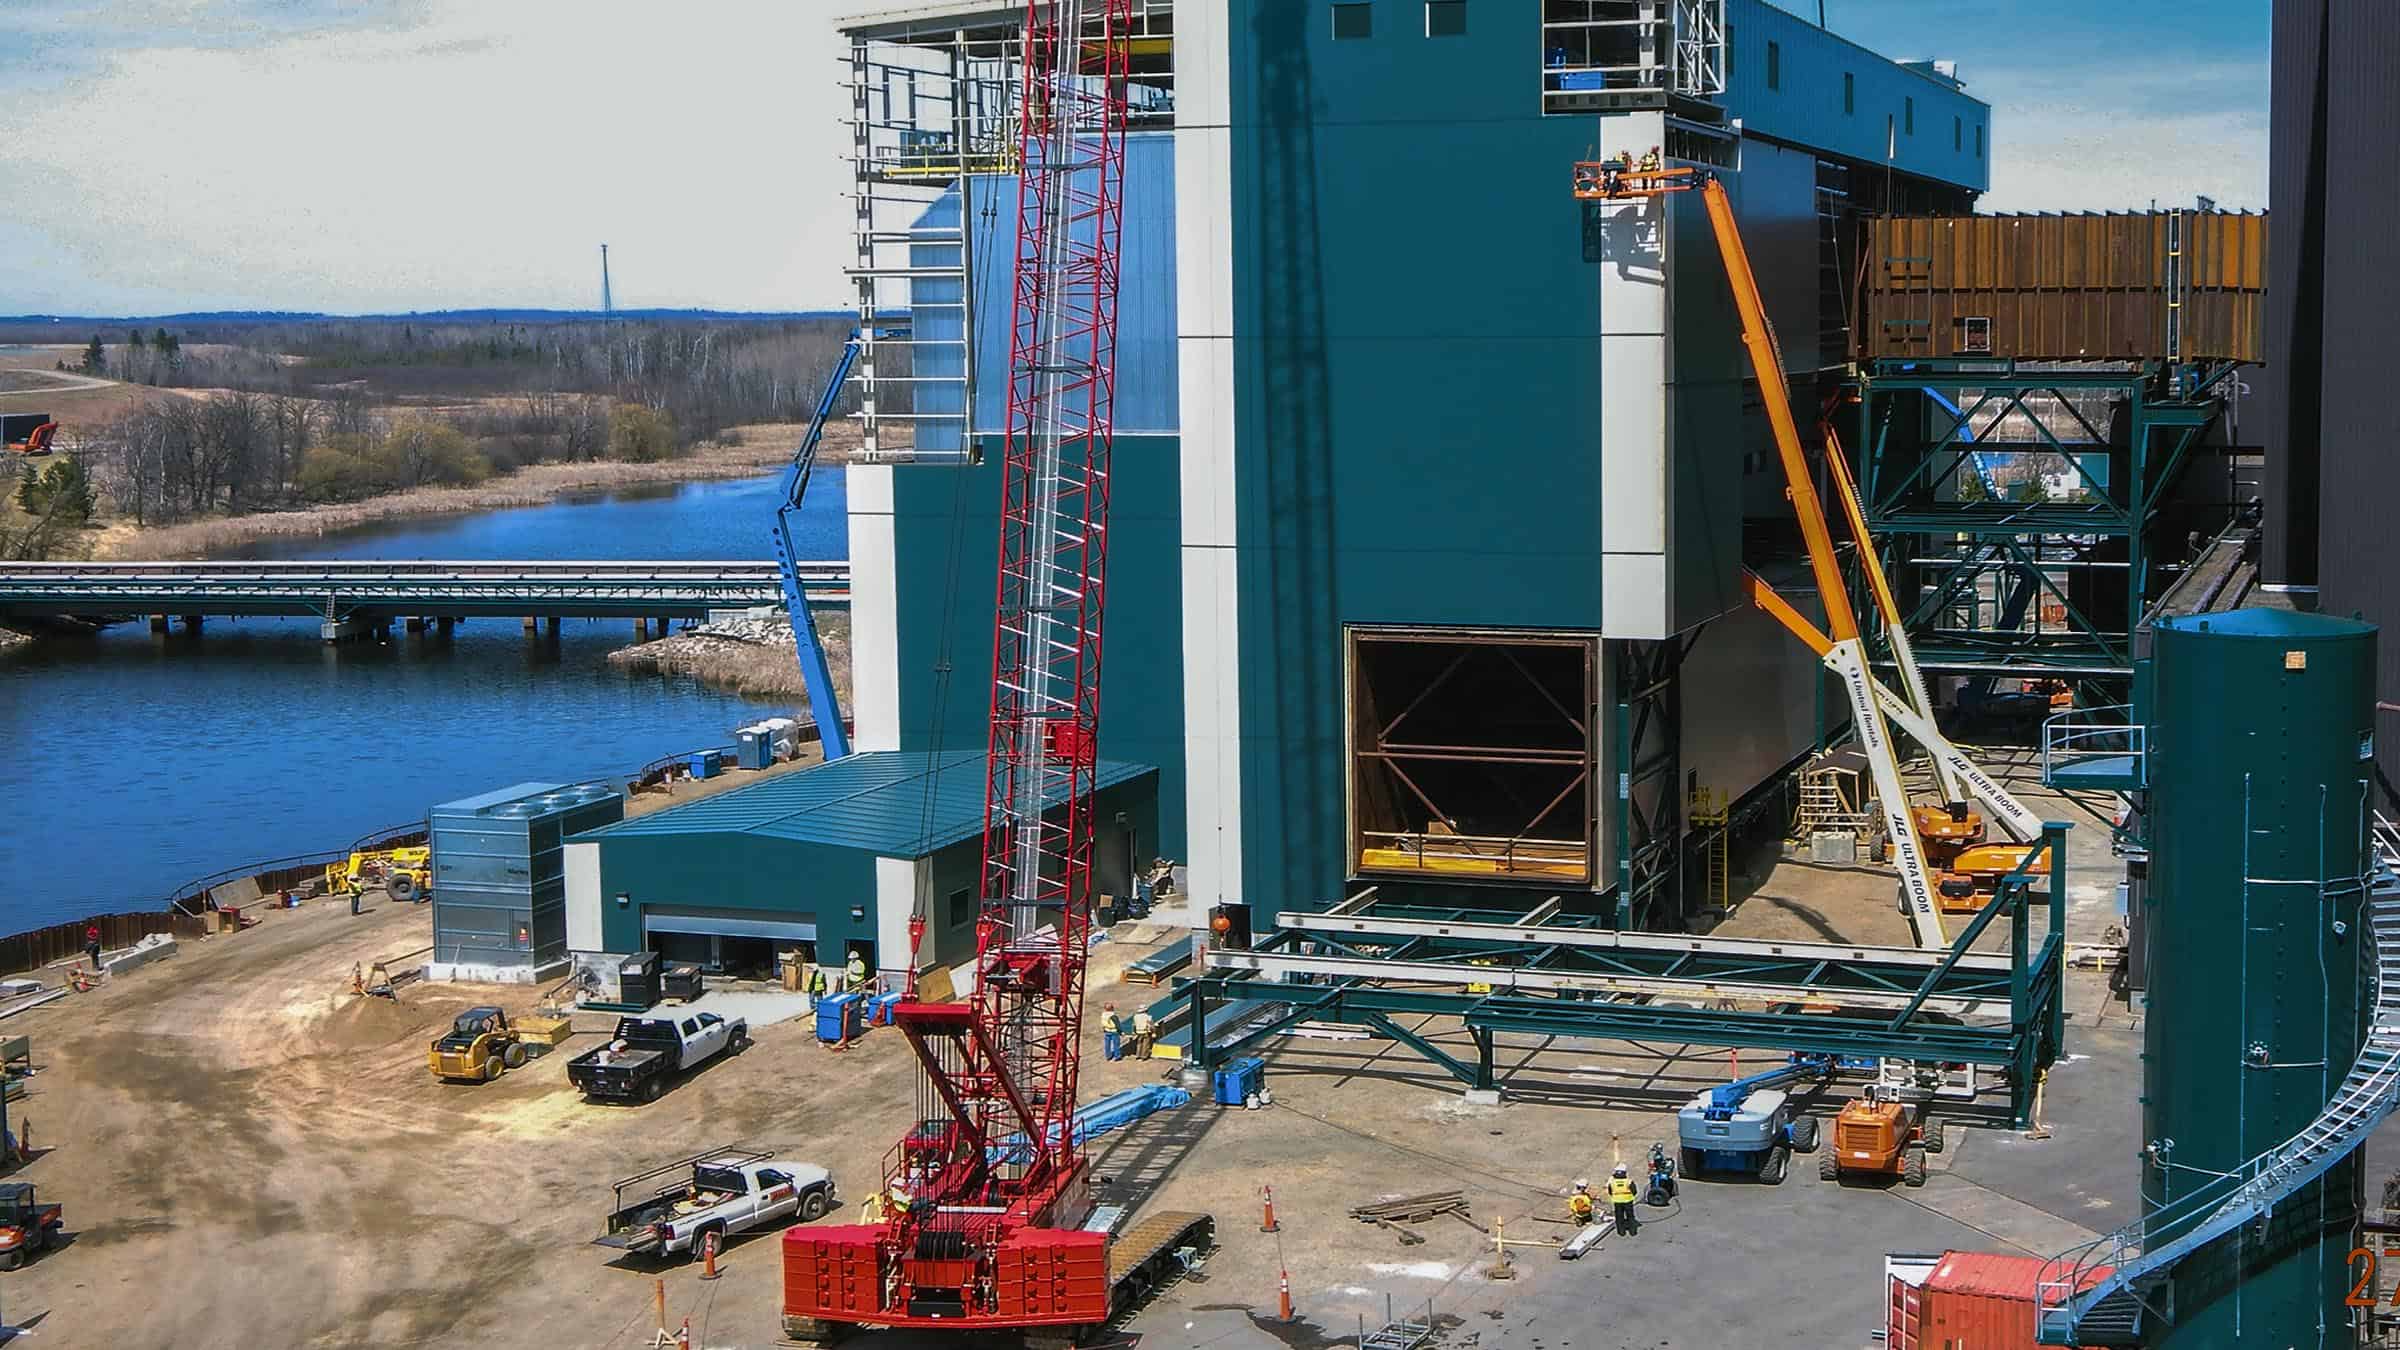 Minnesota Power - Boswell Energy Center Aerial View, Unit 4 Construction of Metal Clad Building Exterior with Crane and Lifts